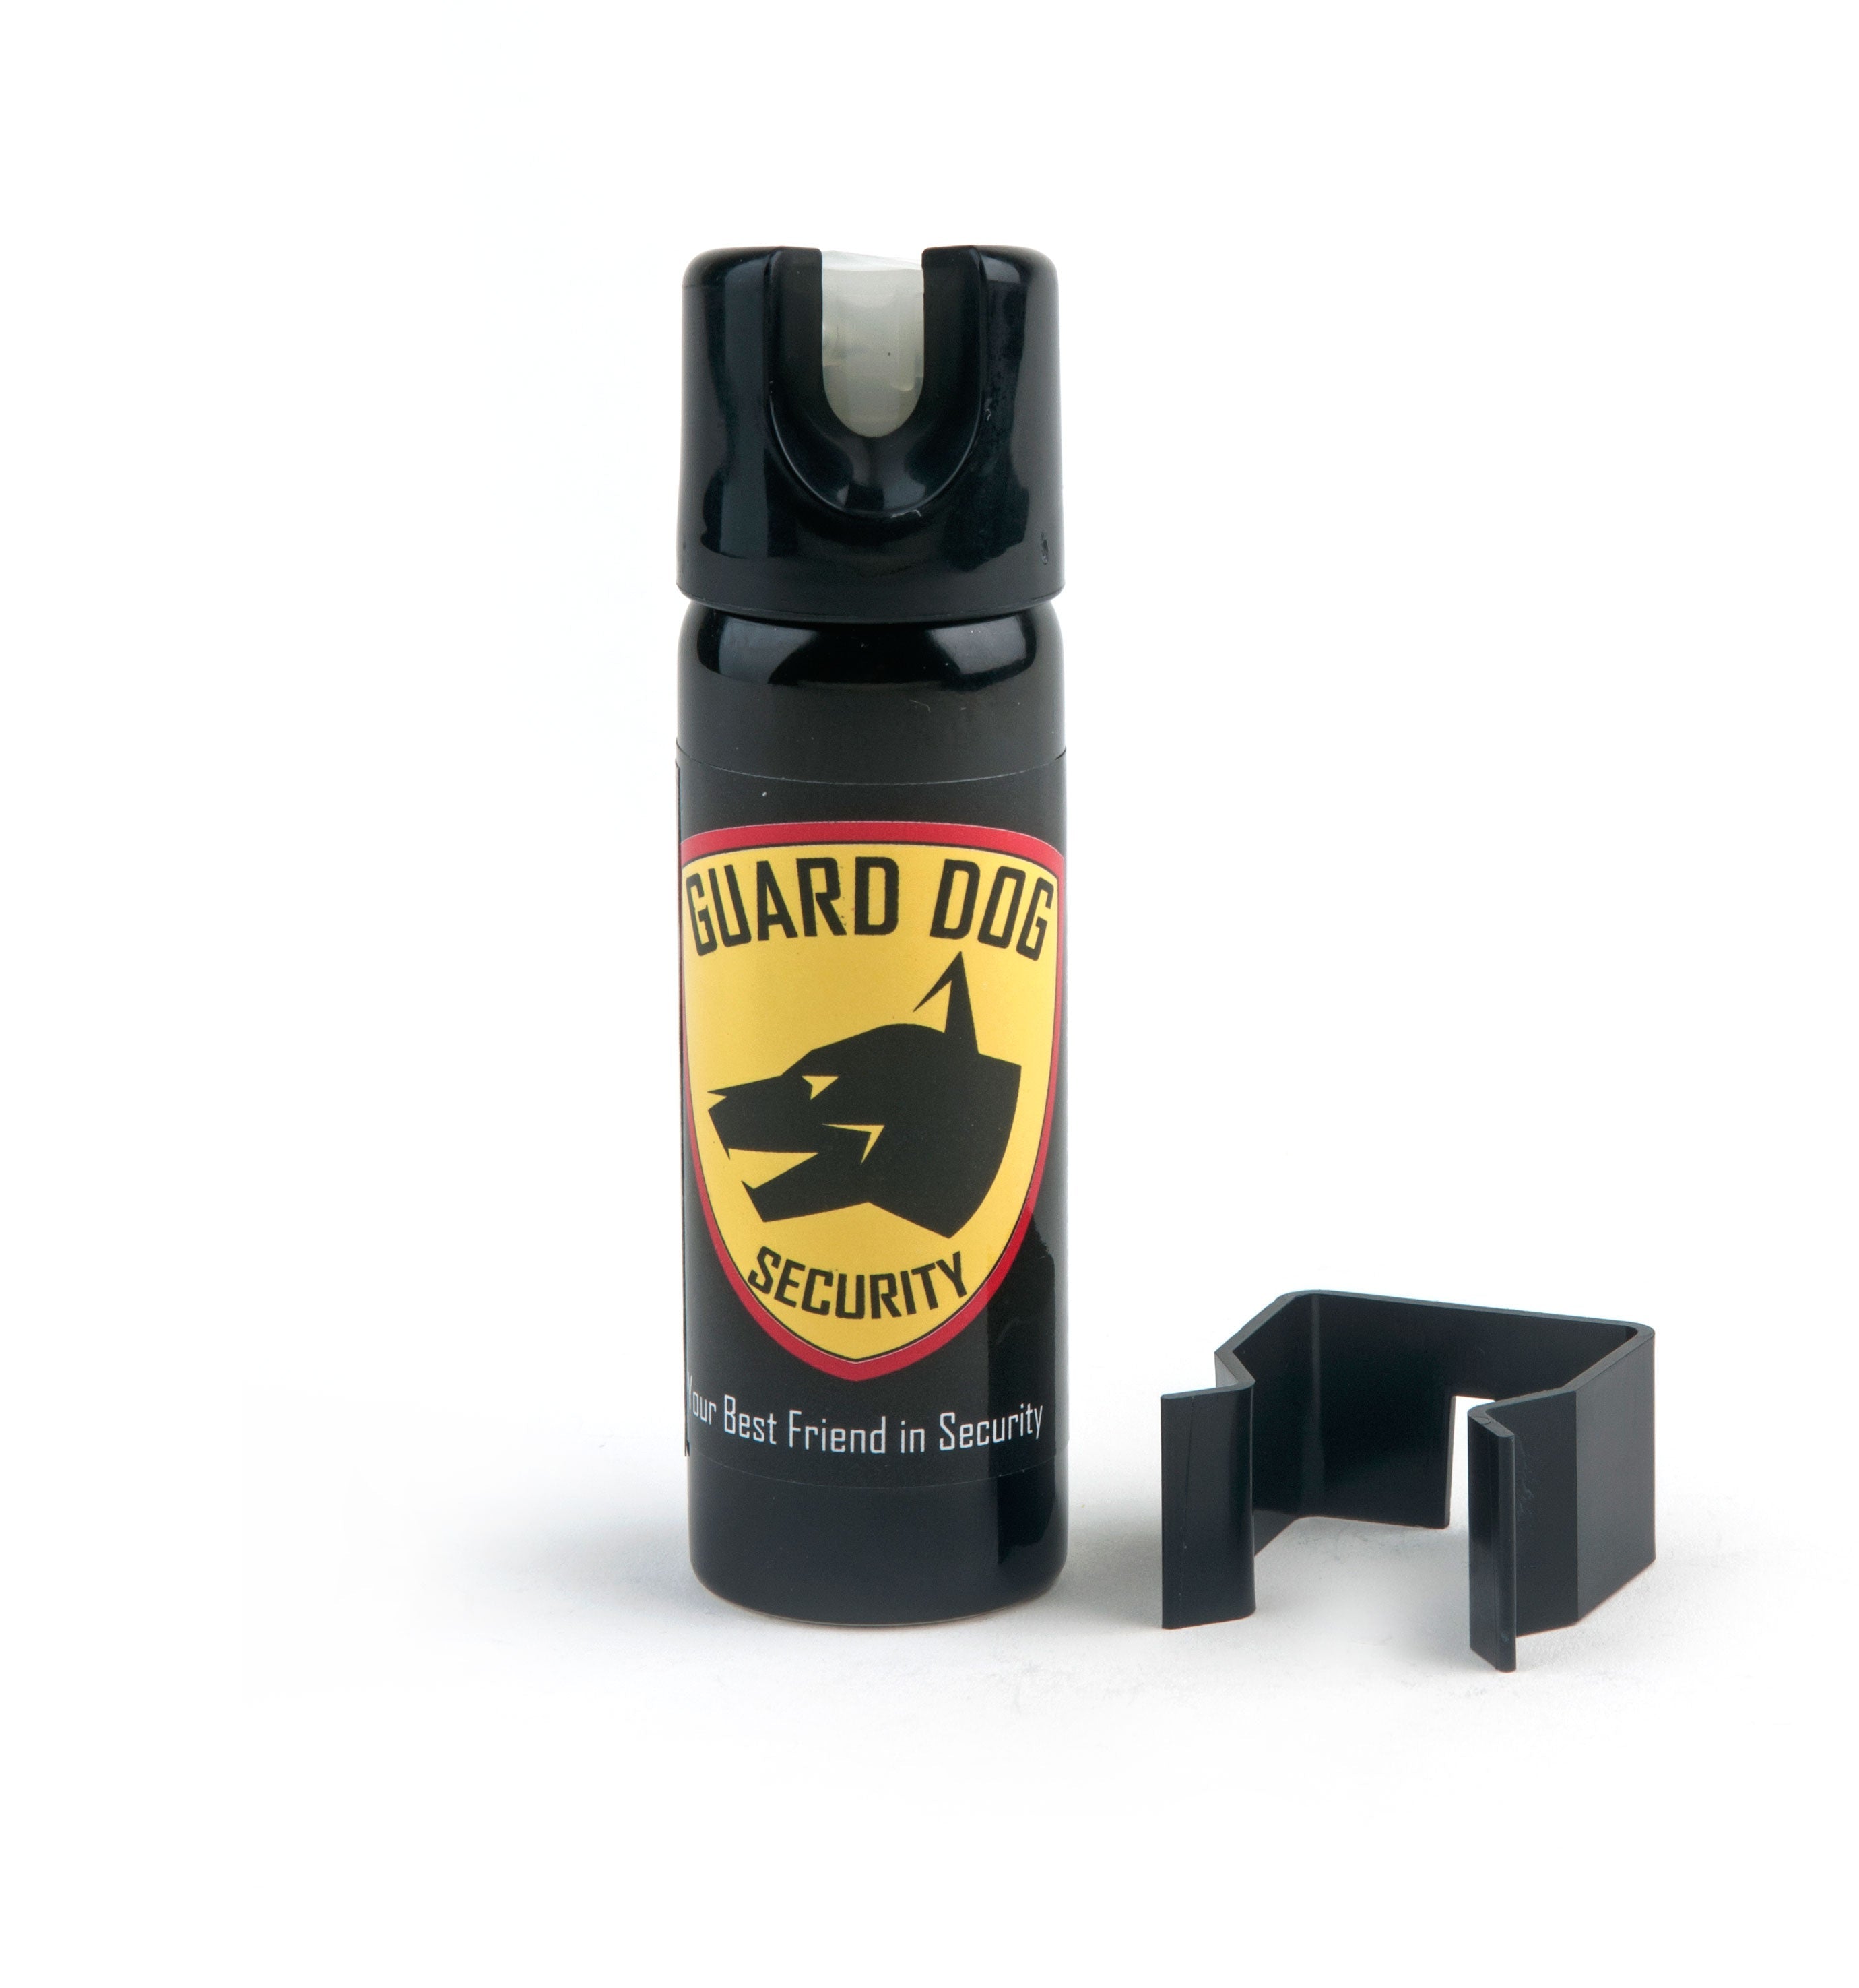 Home Defense Pepper Gel with Wall Mount